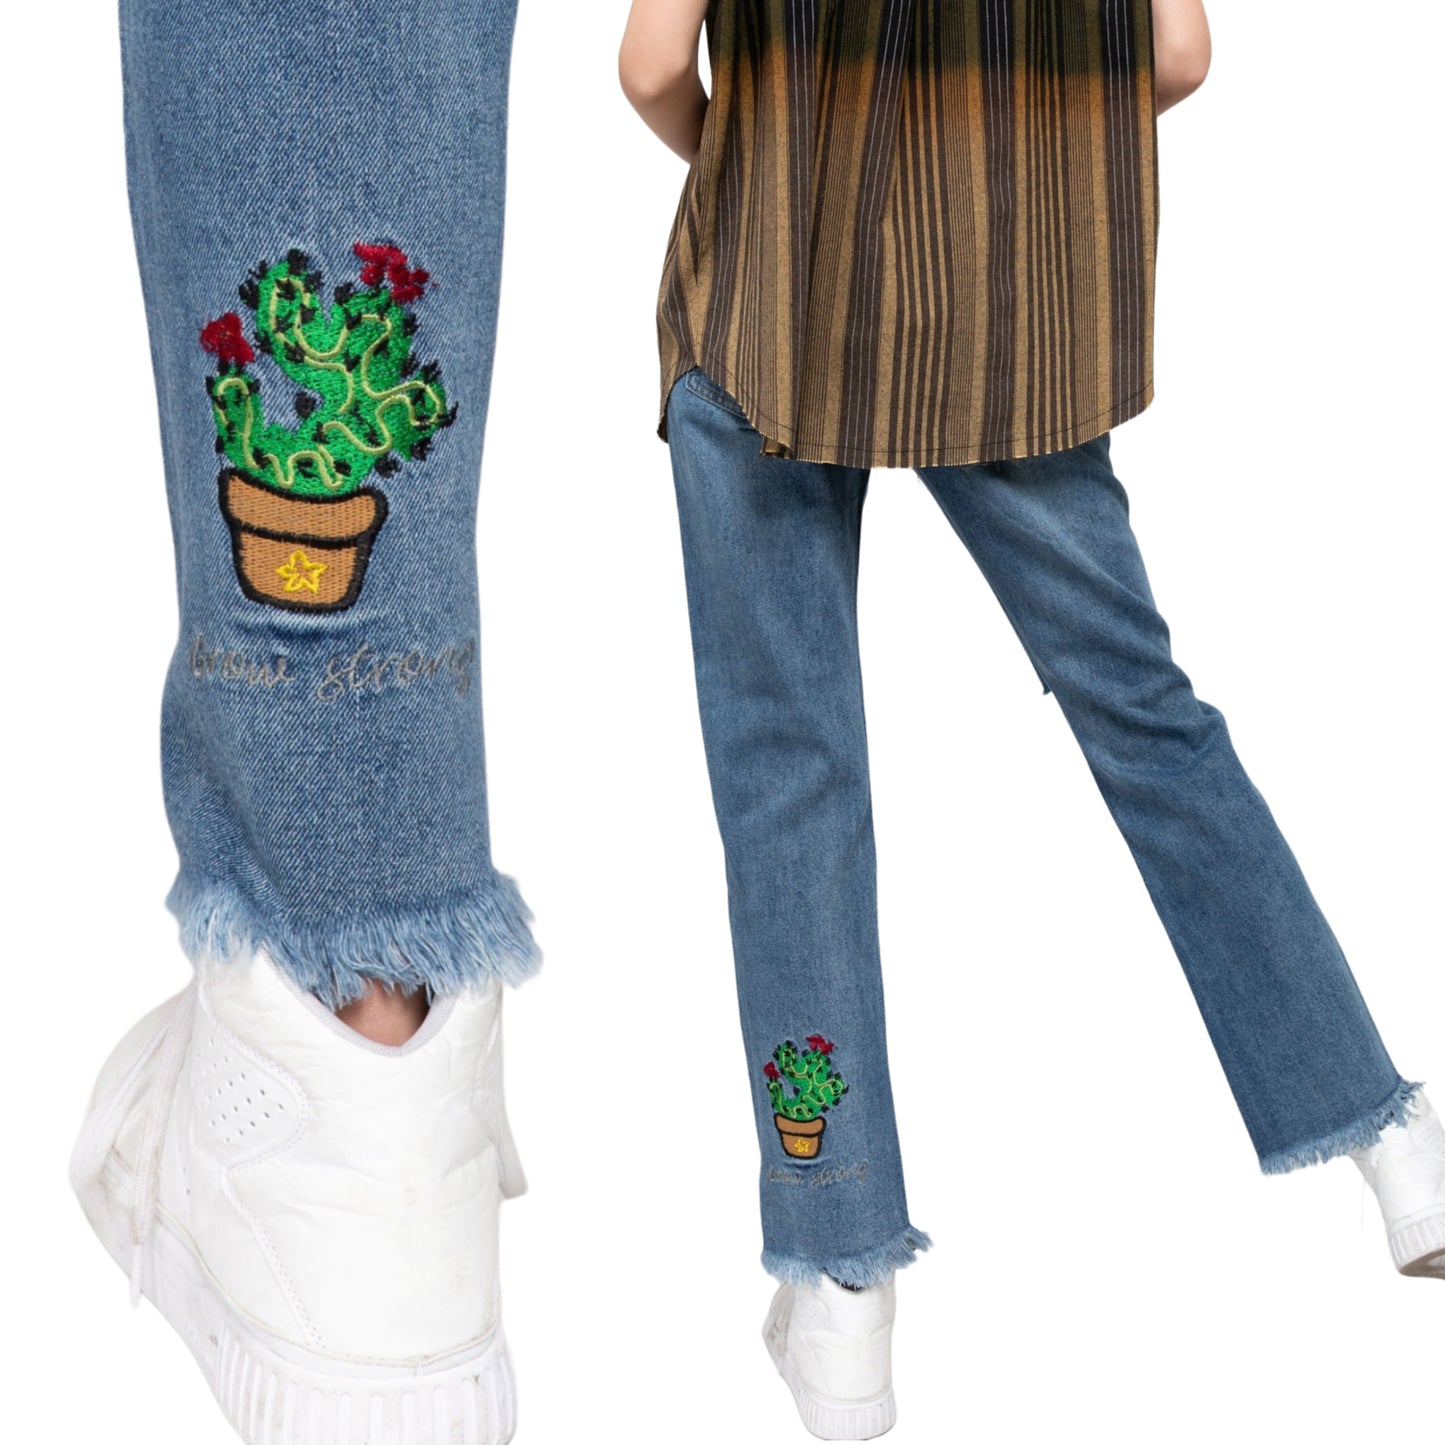 POL Distressed Raw Hem with Cactus Embroidery Denim Jeans